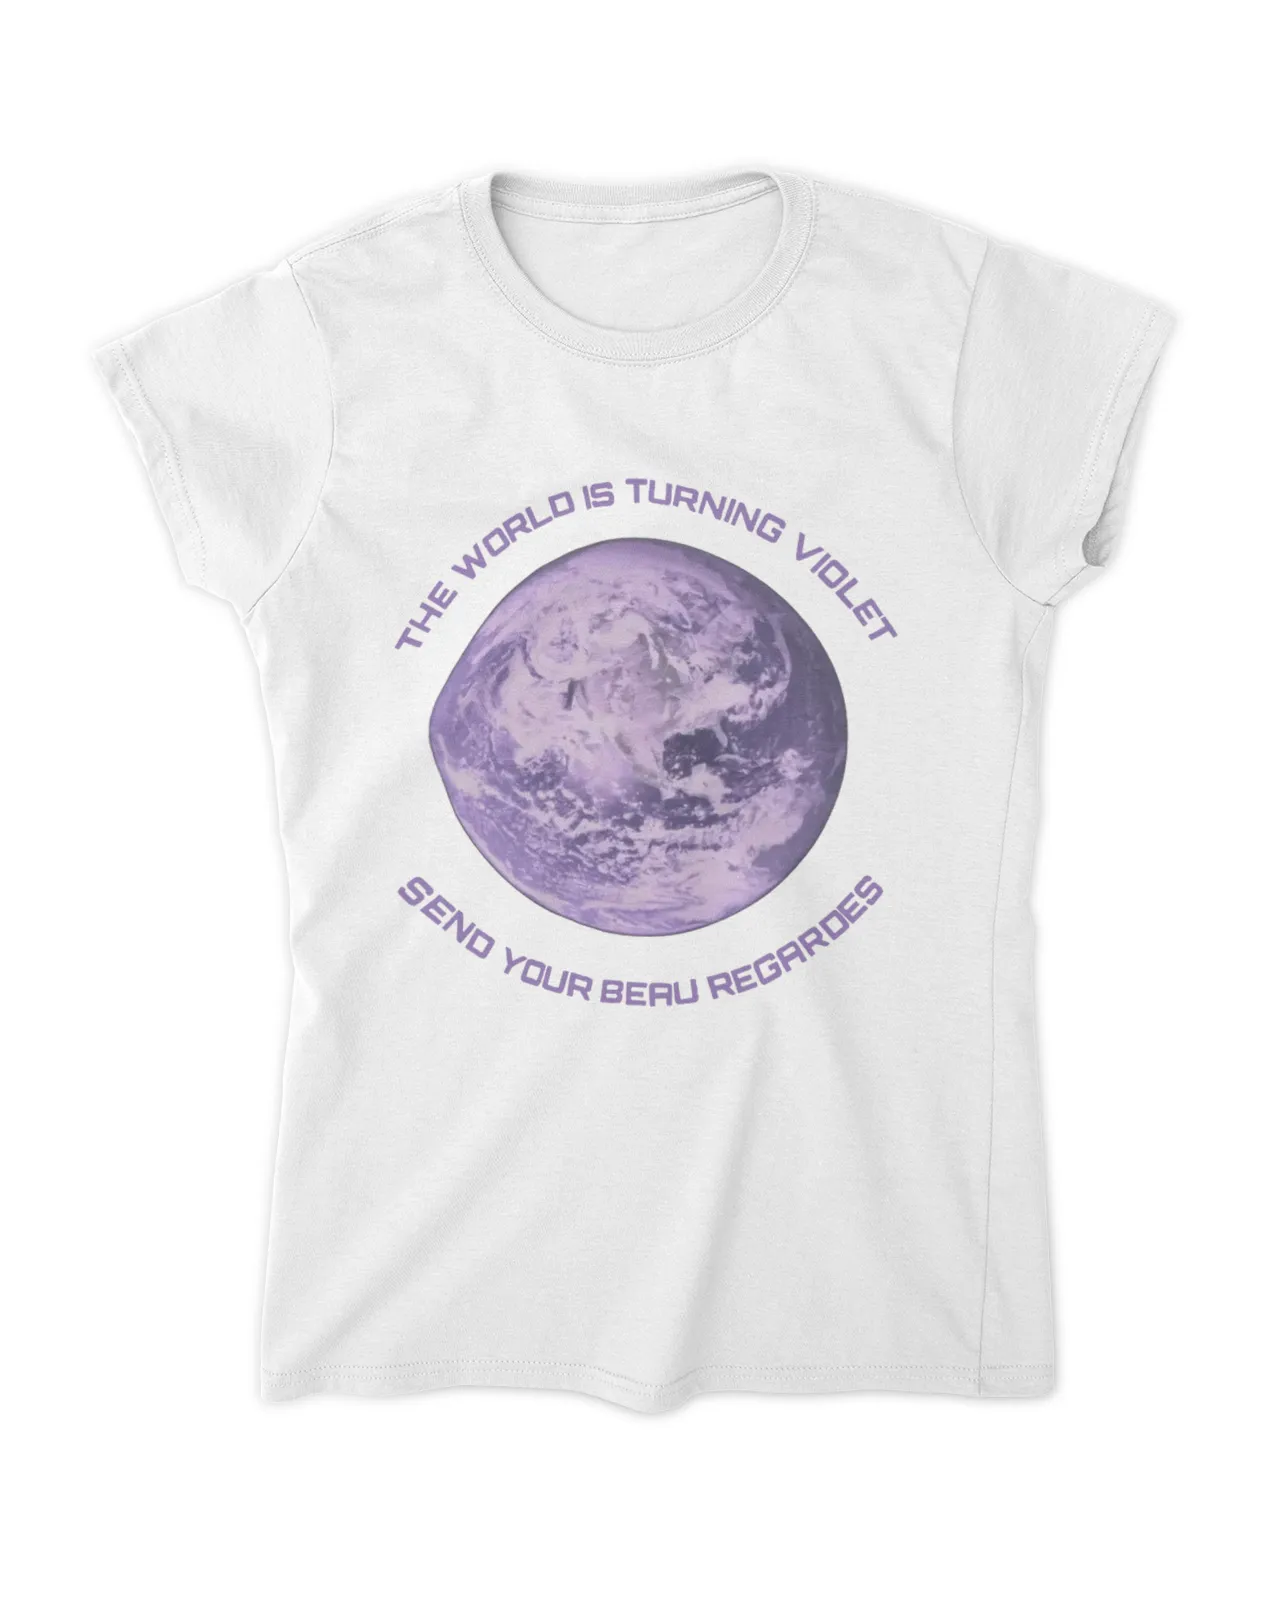 The World Is Turning Violet Send Your Beau Regardes Shirt